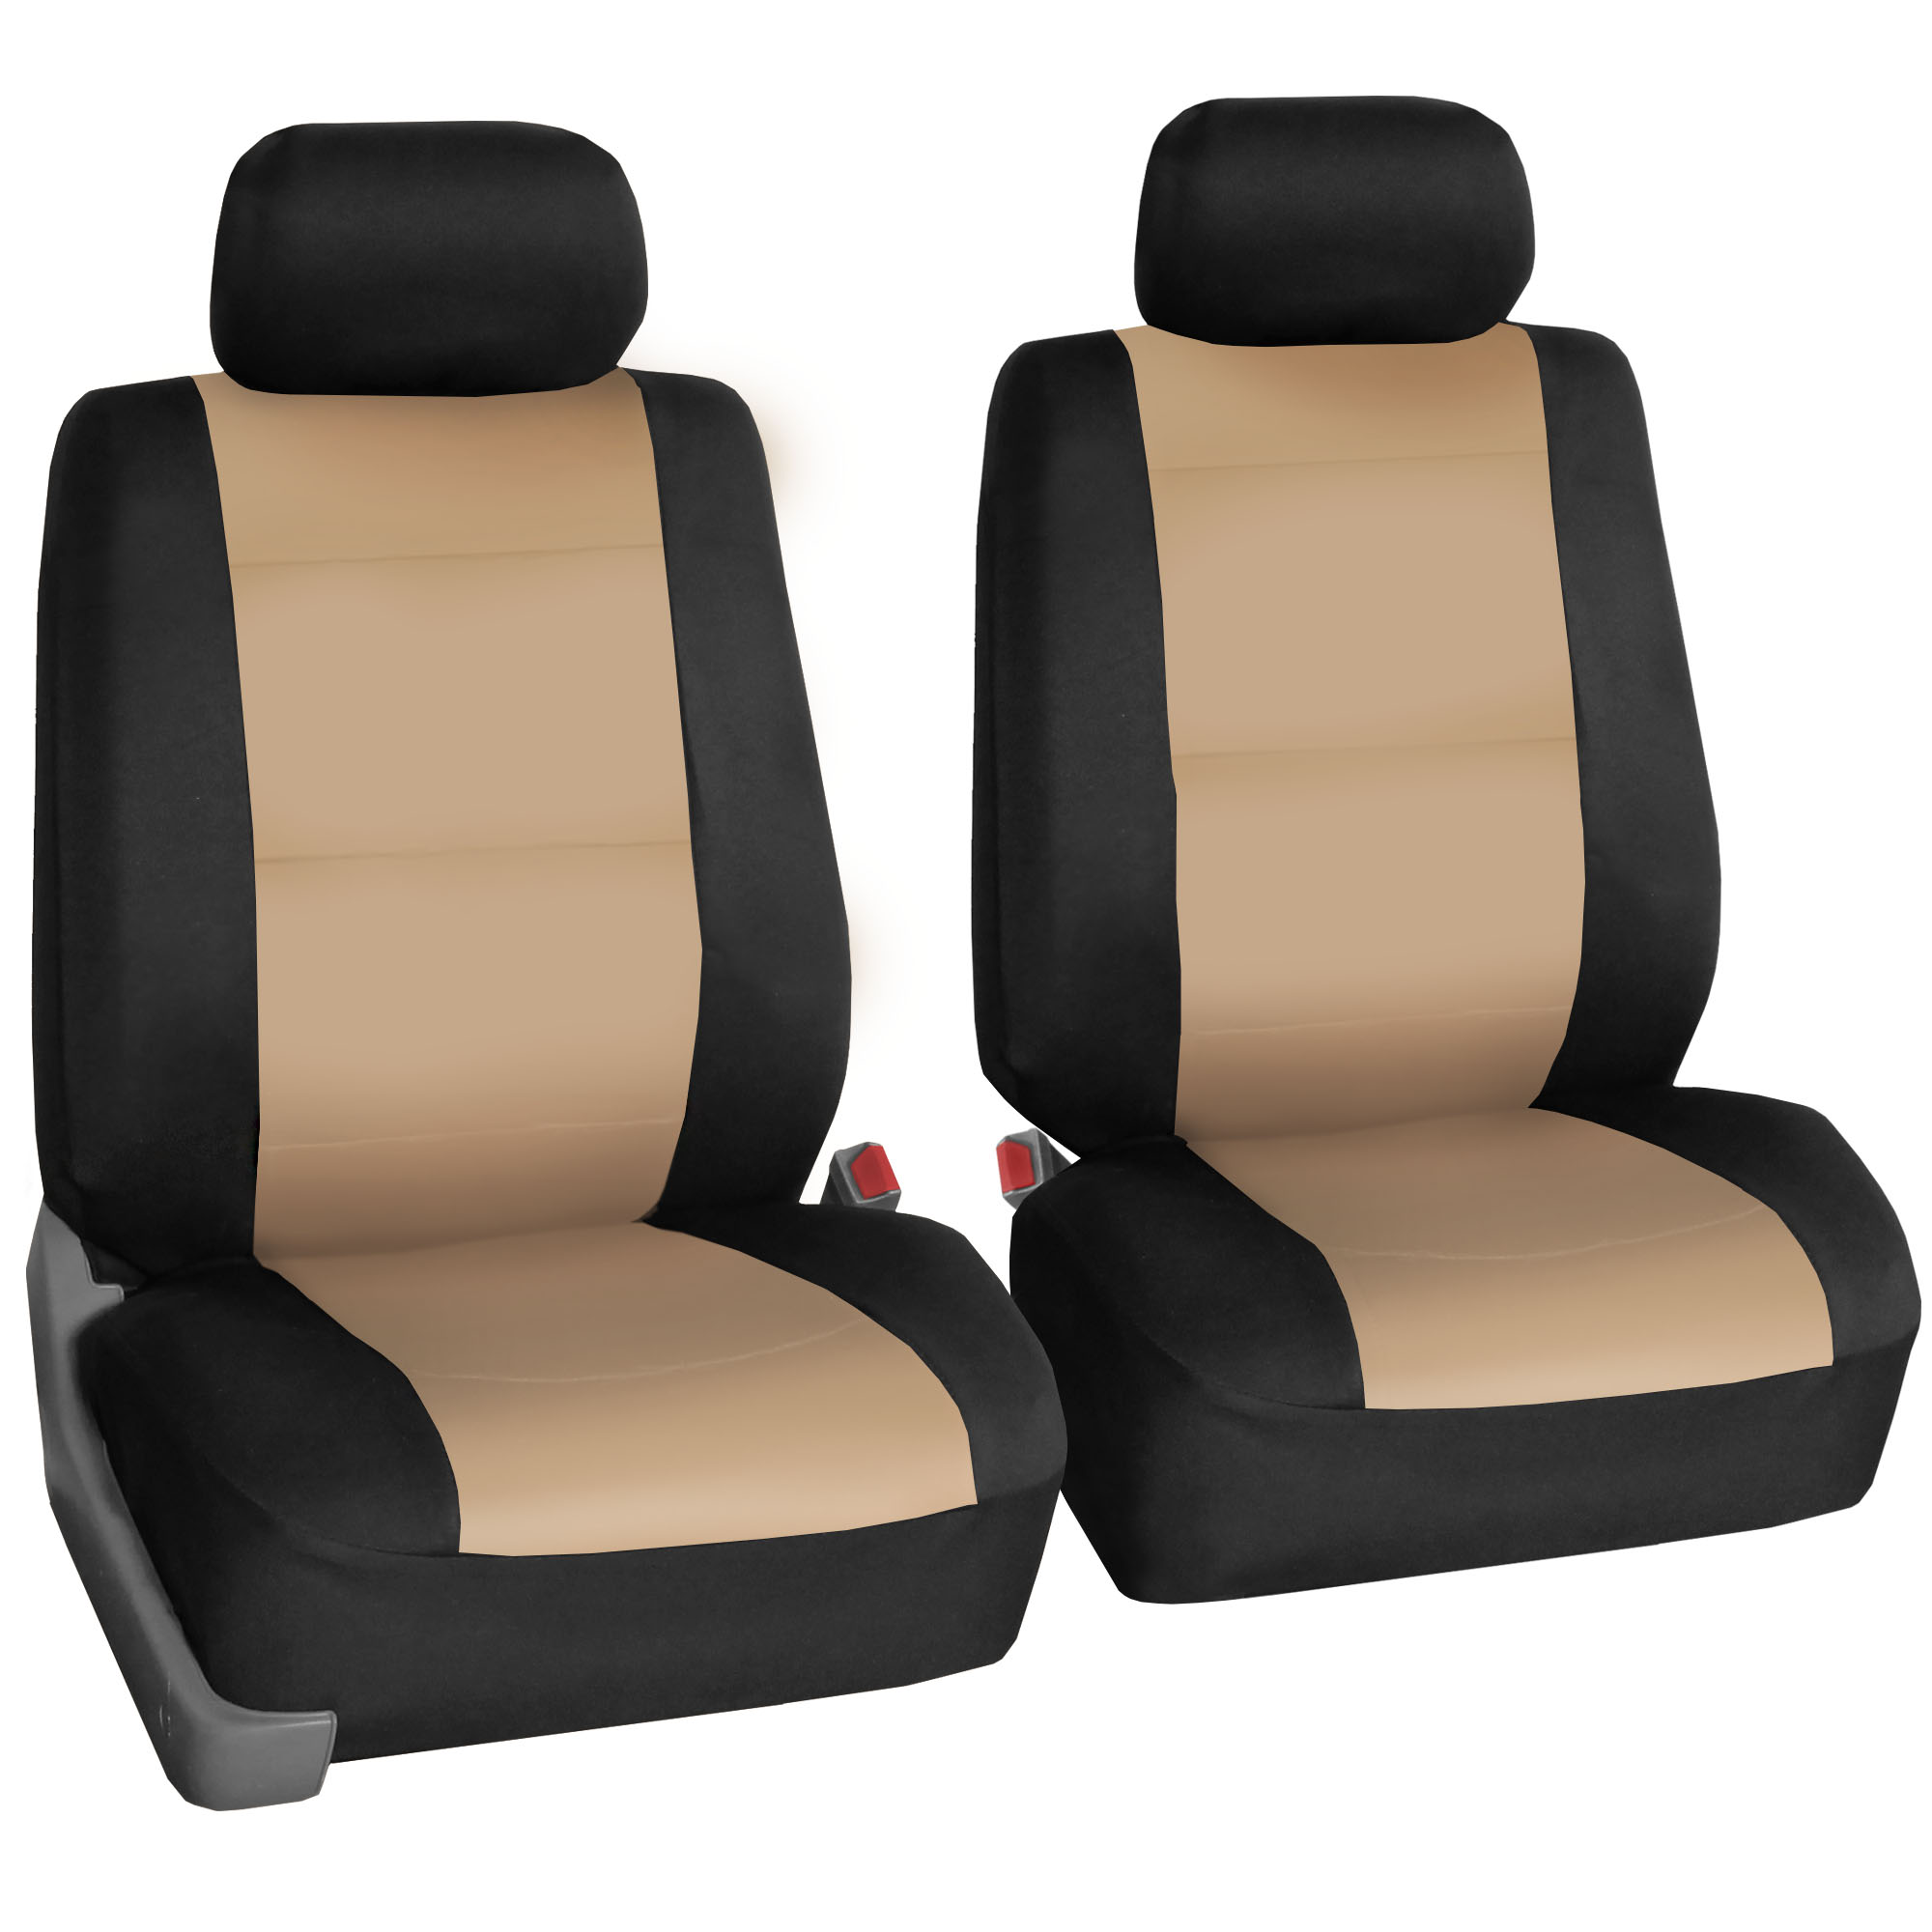 FH Group Universal Fit Neoprene Car Seat Covers, Airbag Compatible Front Set - Beige FB083102BEIGE - image 1 of 6